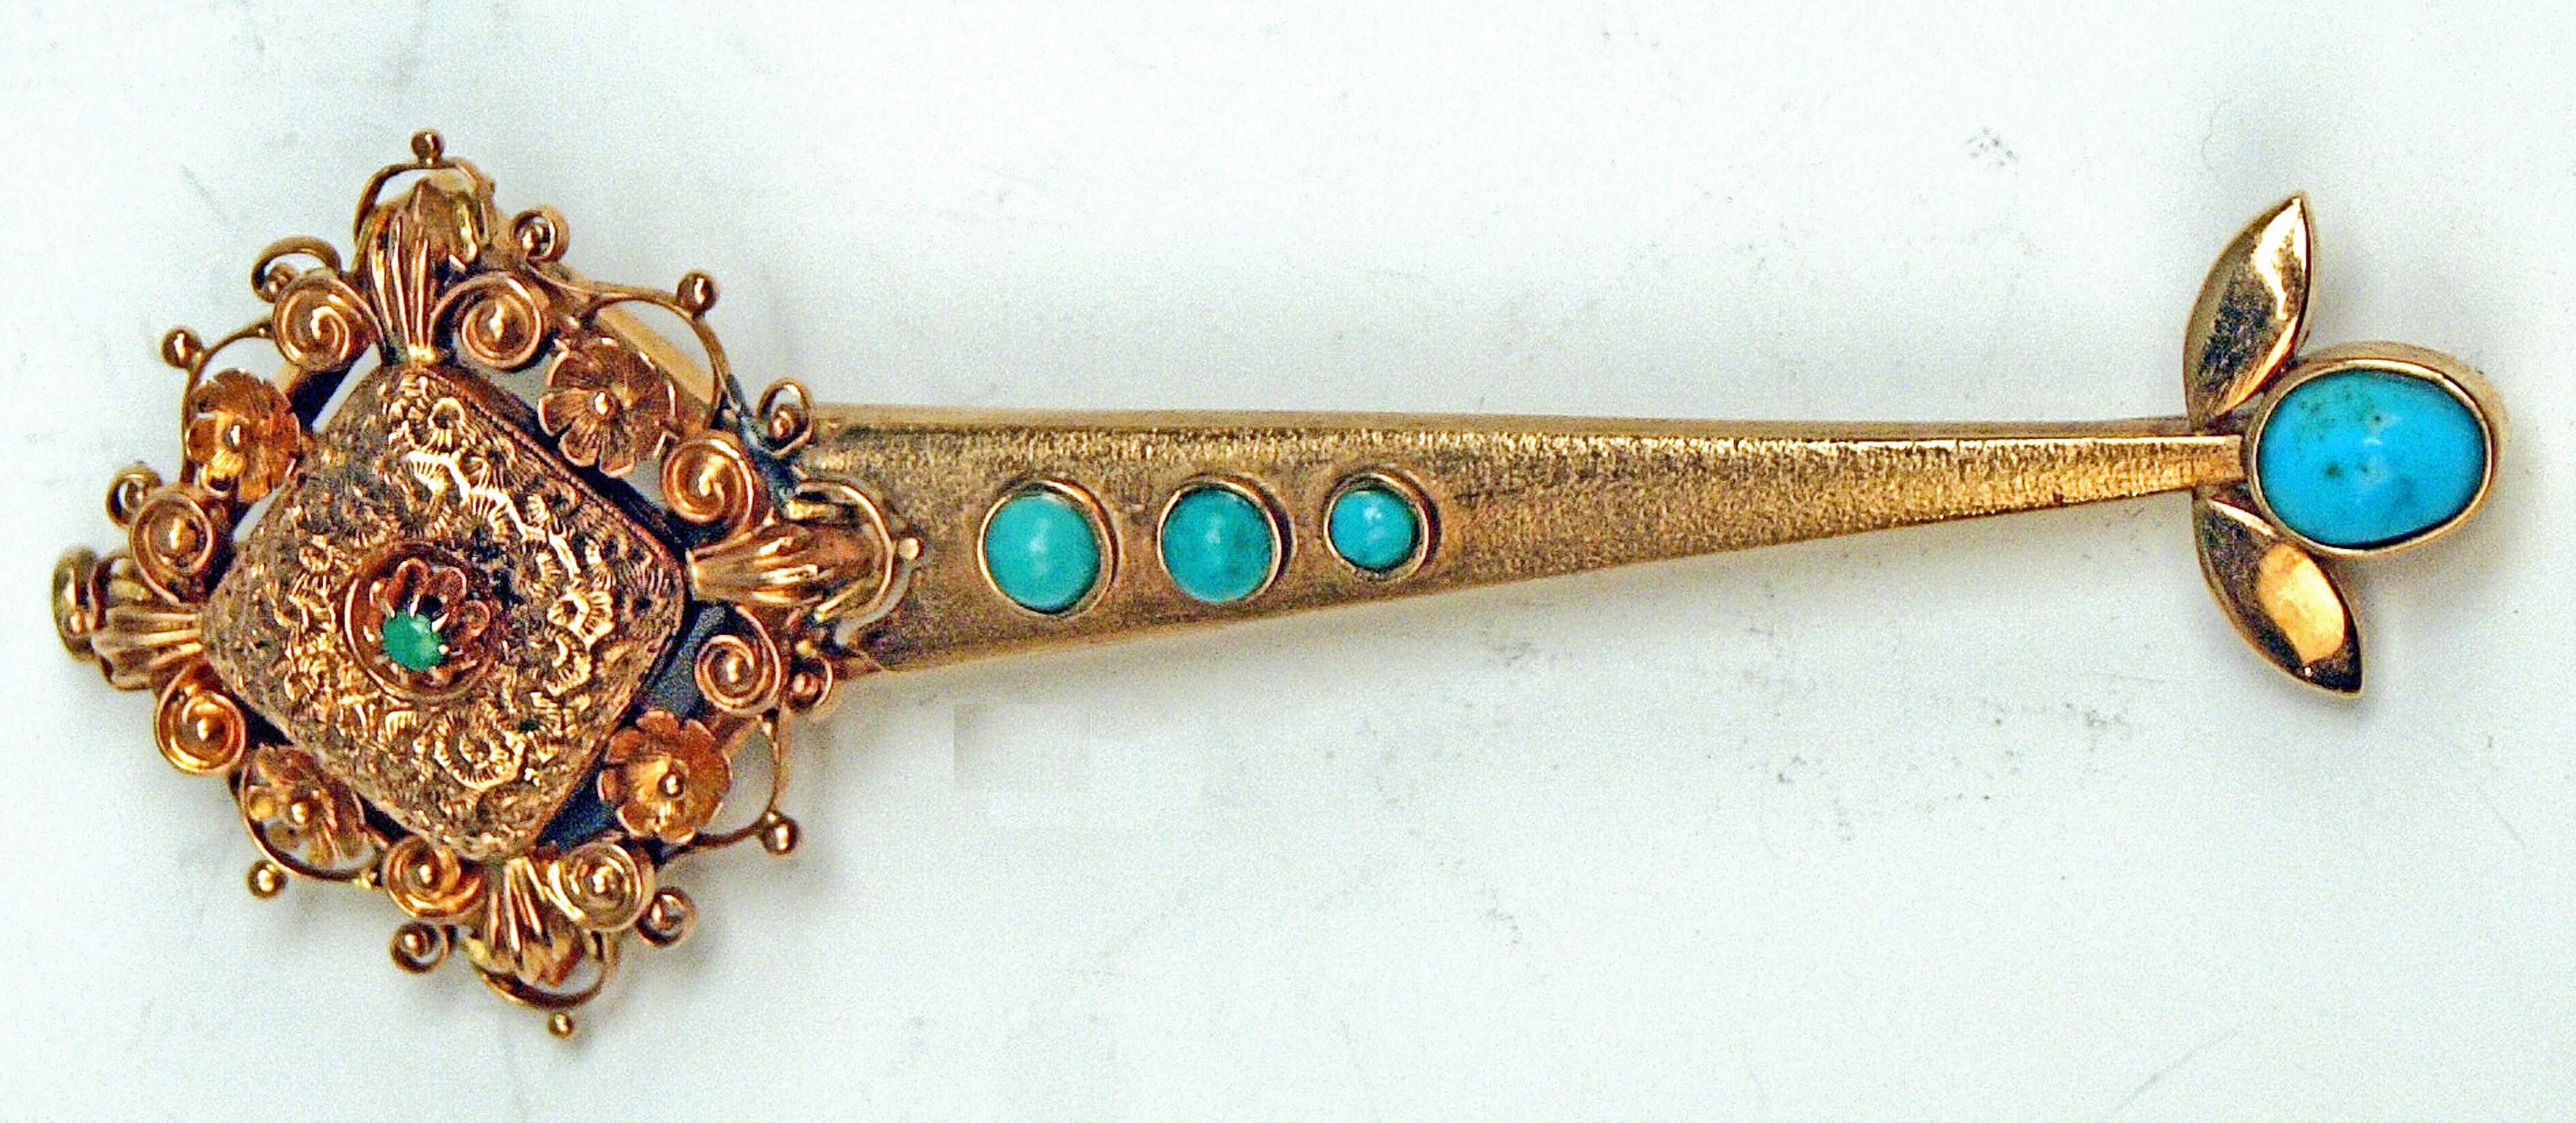 GOLDEN LATE BIEDERMEIER  (= HIGH VICTORIAN)  
Stick Brooch with Turquoises.
MADE CIRCA 1860.

GOLD (14 ct / 585)   &  TURQUOISES   
WEIGHT:  15.0 GRAMS  (= 0.52 OZ / 0.48 TROY OUNCES)
THE BROOCH IS HALLMARKED WITH  '585'  WHICH MEANS GOLD 14ct   / 